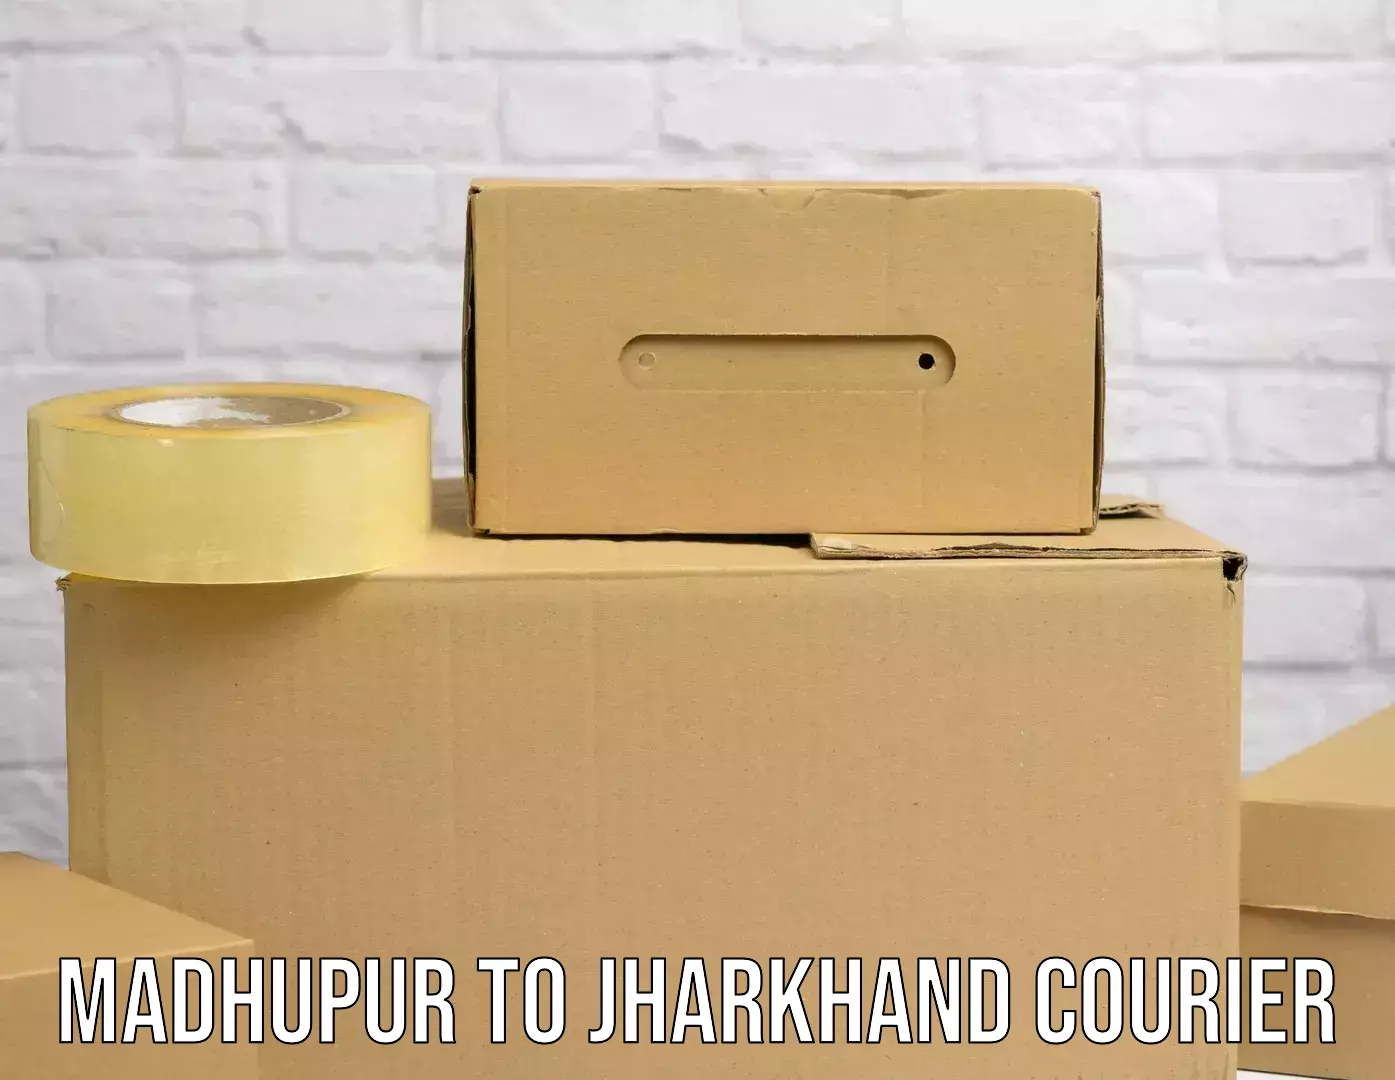 Quick dispatch service in Madhupur to Jharkhand